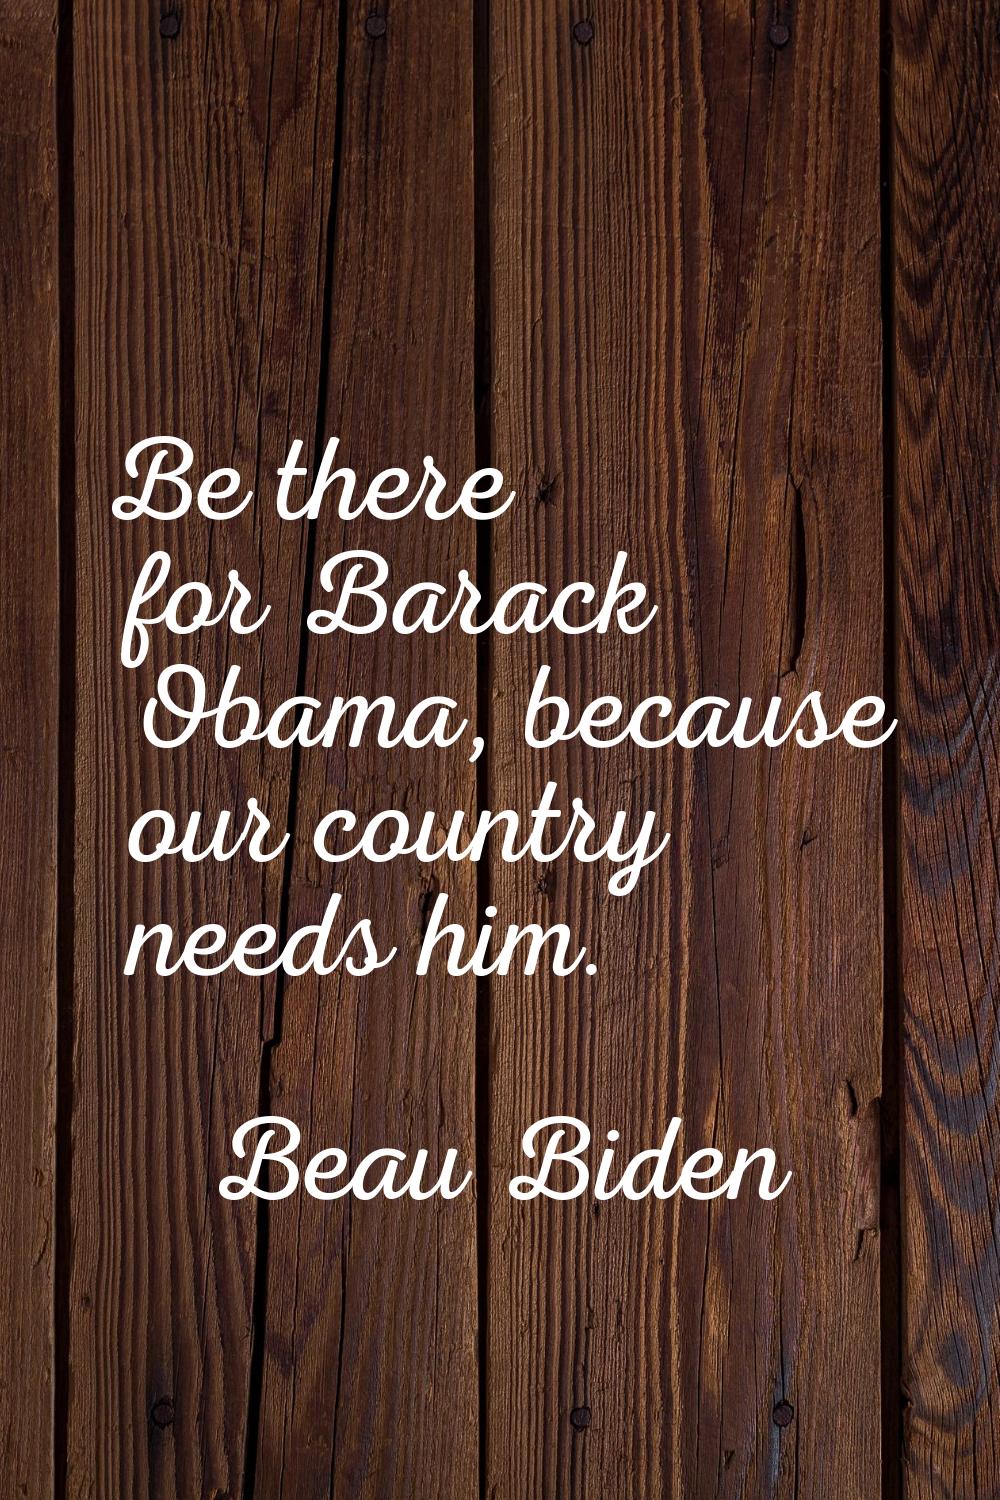 Be there for Barack Obama, because our country needs him.